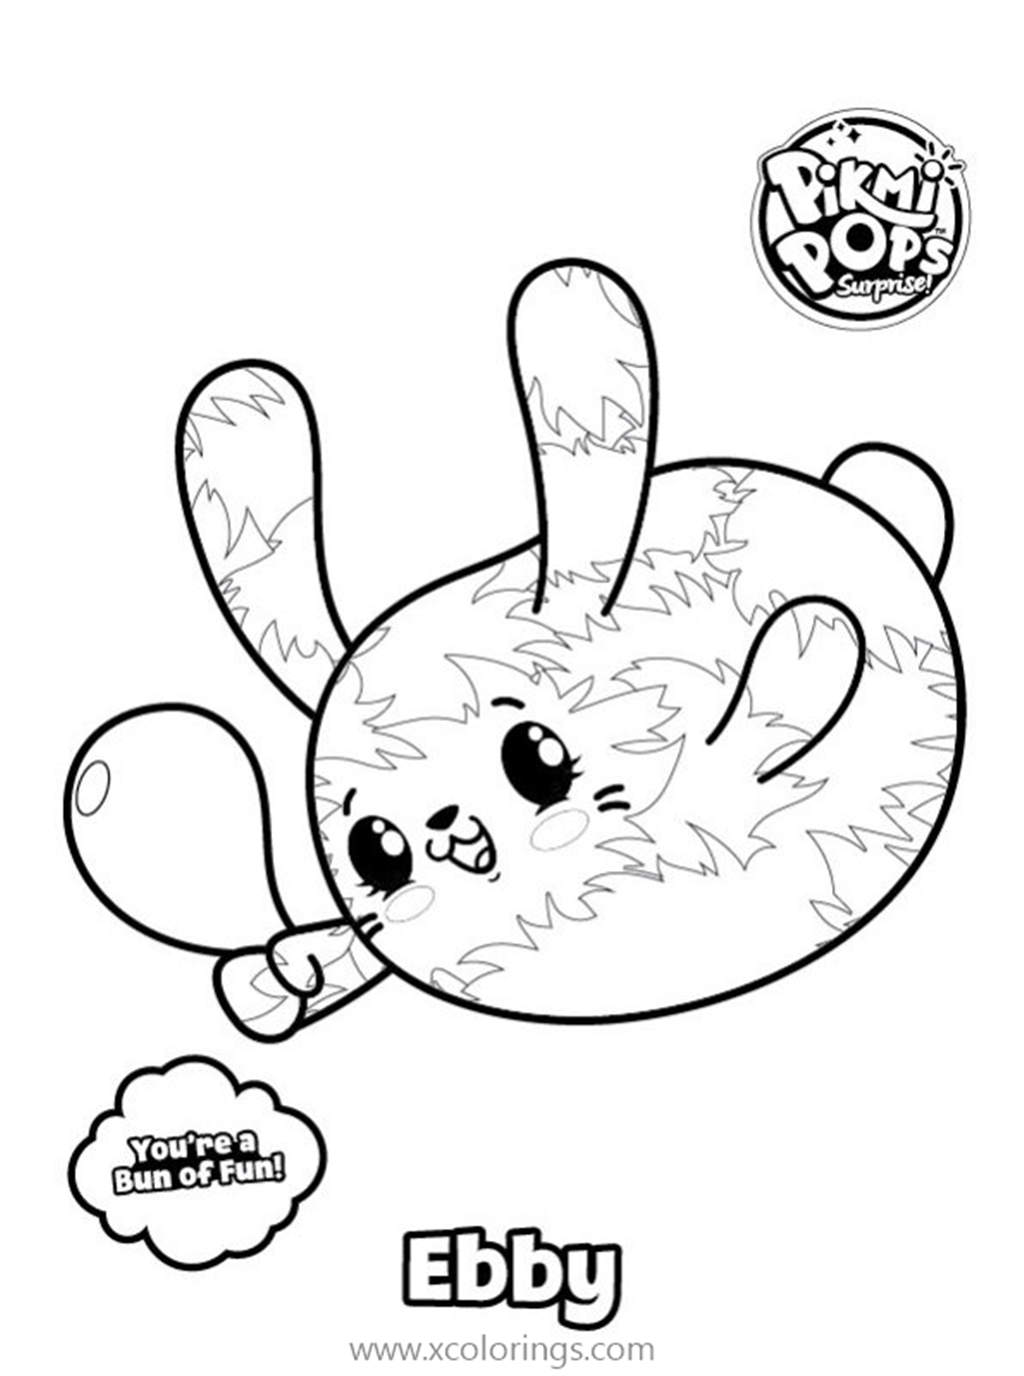 Free ebby from Pikmi Pops Coloring Pages printable